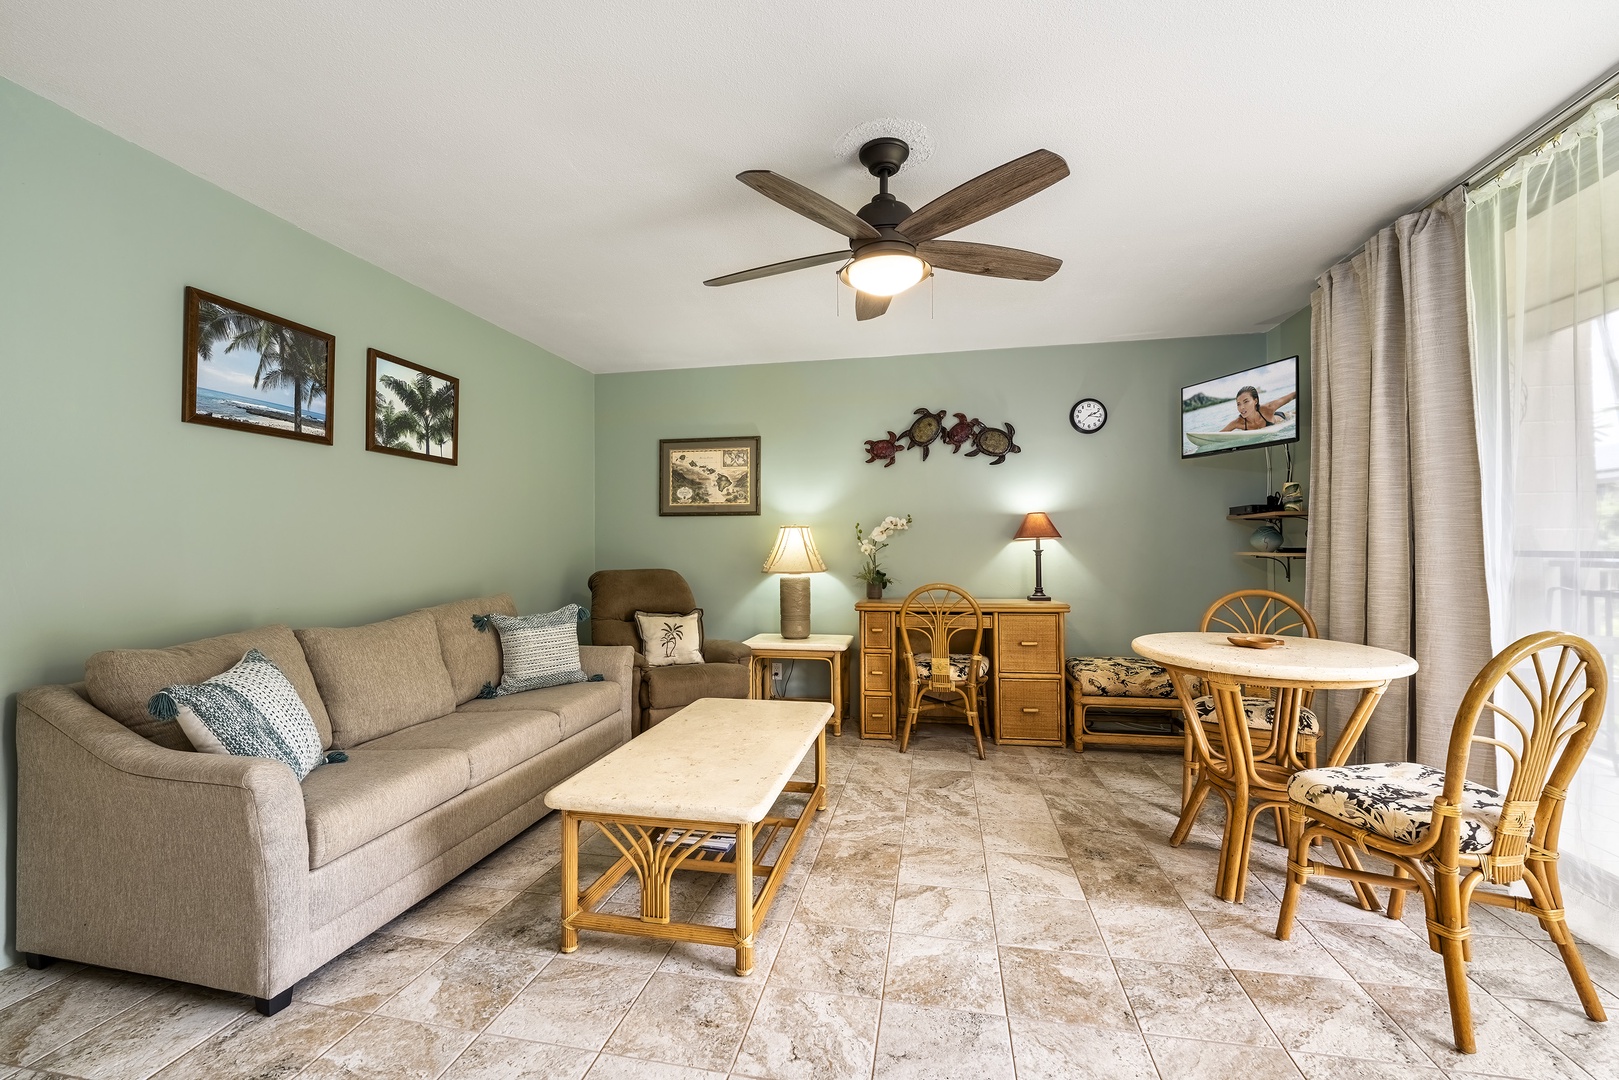 Kailua Kona Vacation Rentals, Kona Makai 3102 - Whether you want to enjoy a show or work this is the place to be!